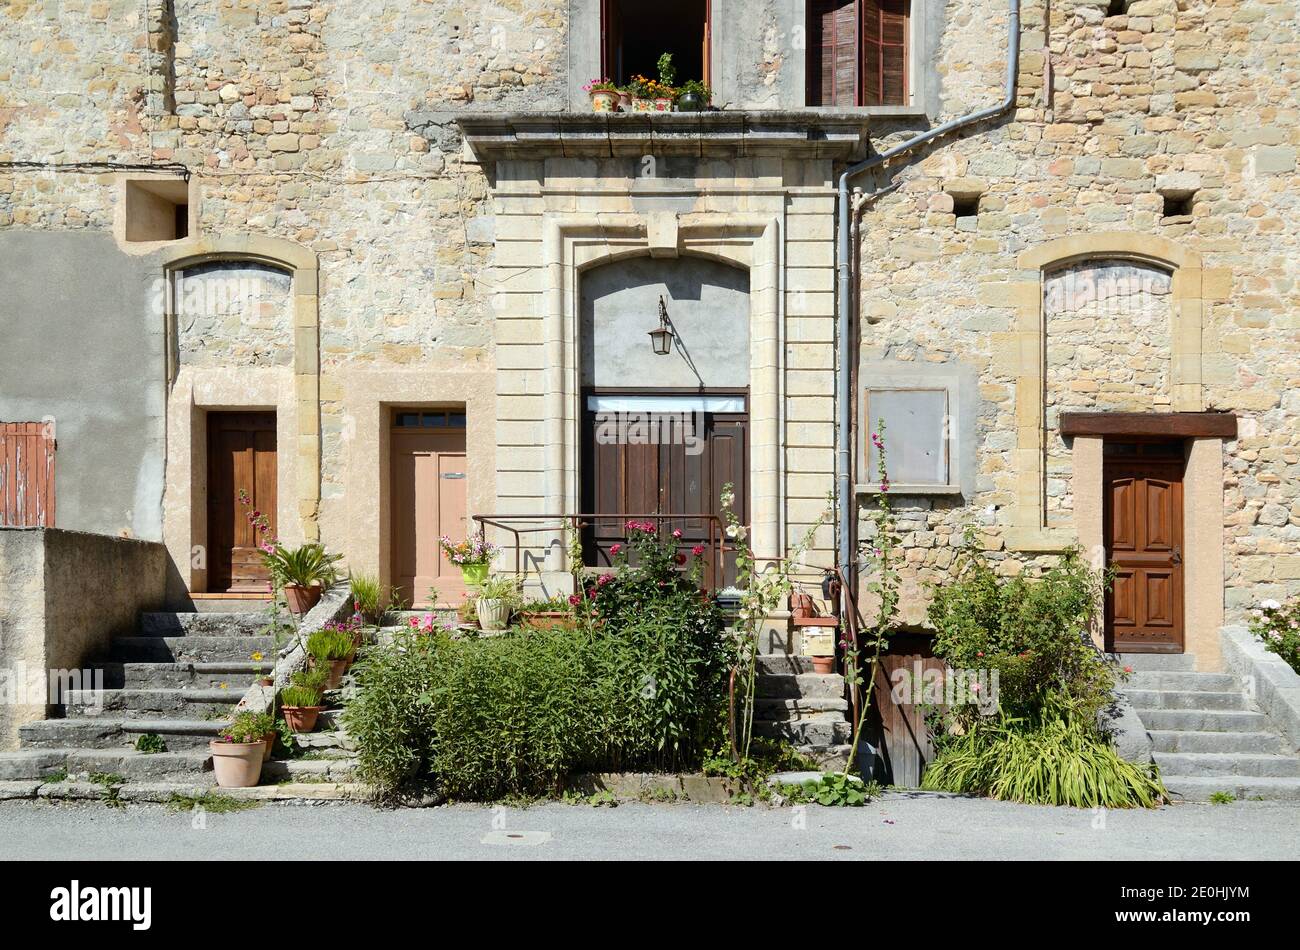 Former Château, Presbytery or Rectory Converted to Apartments Showing New Openings in Original Façade Senez Alpes-de-Haute-Provence Provence France Stock Photo